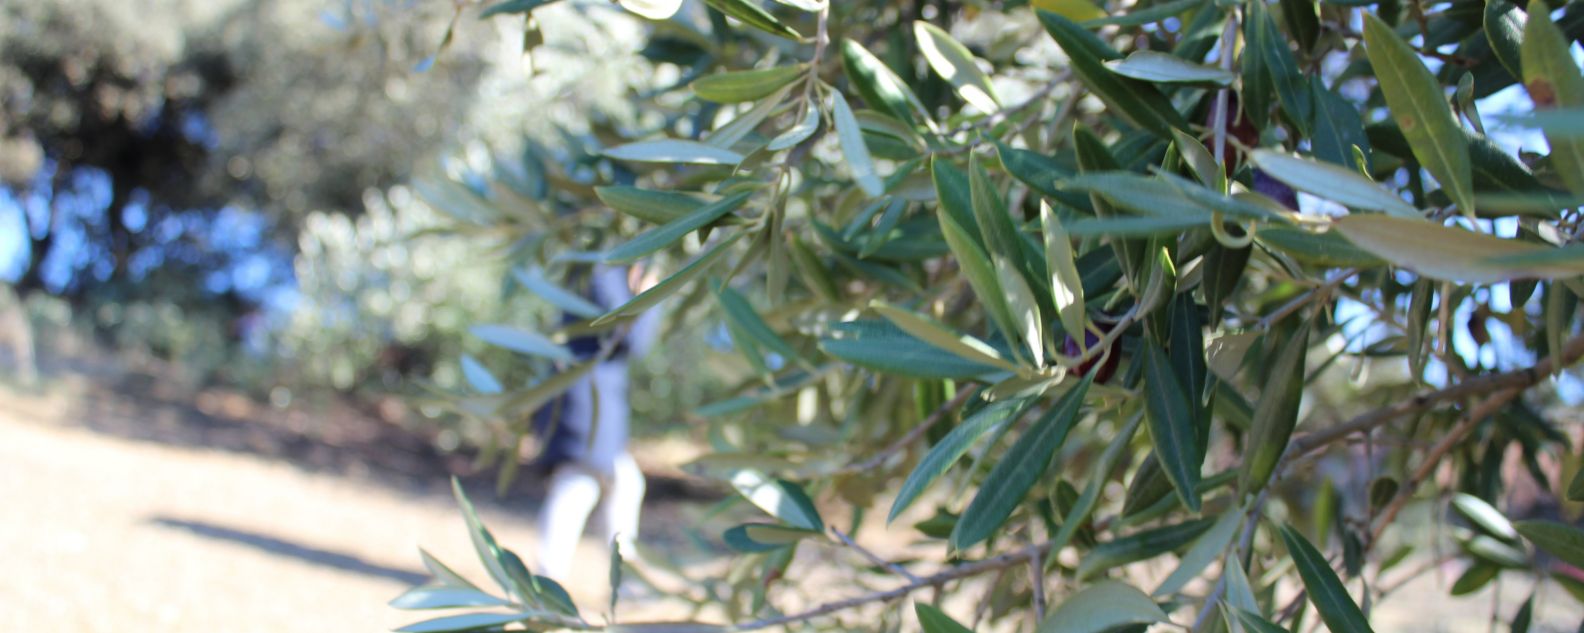 Olives tree. Image to illustrate web customer story for Deoleo